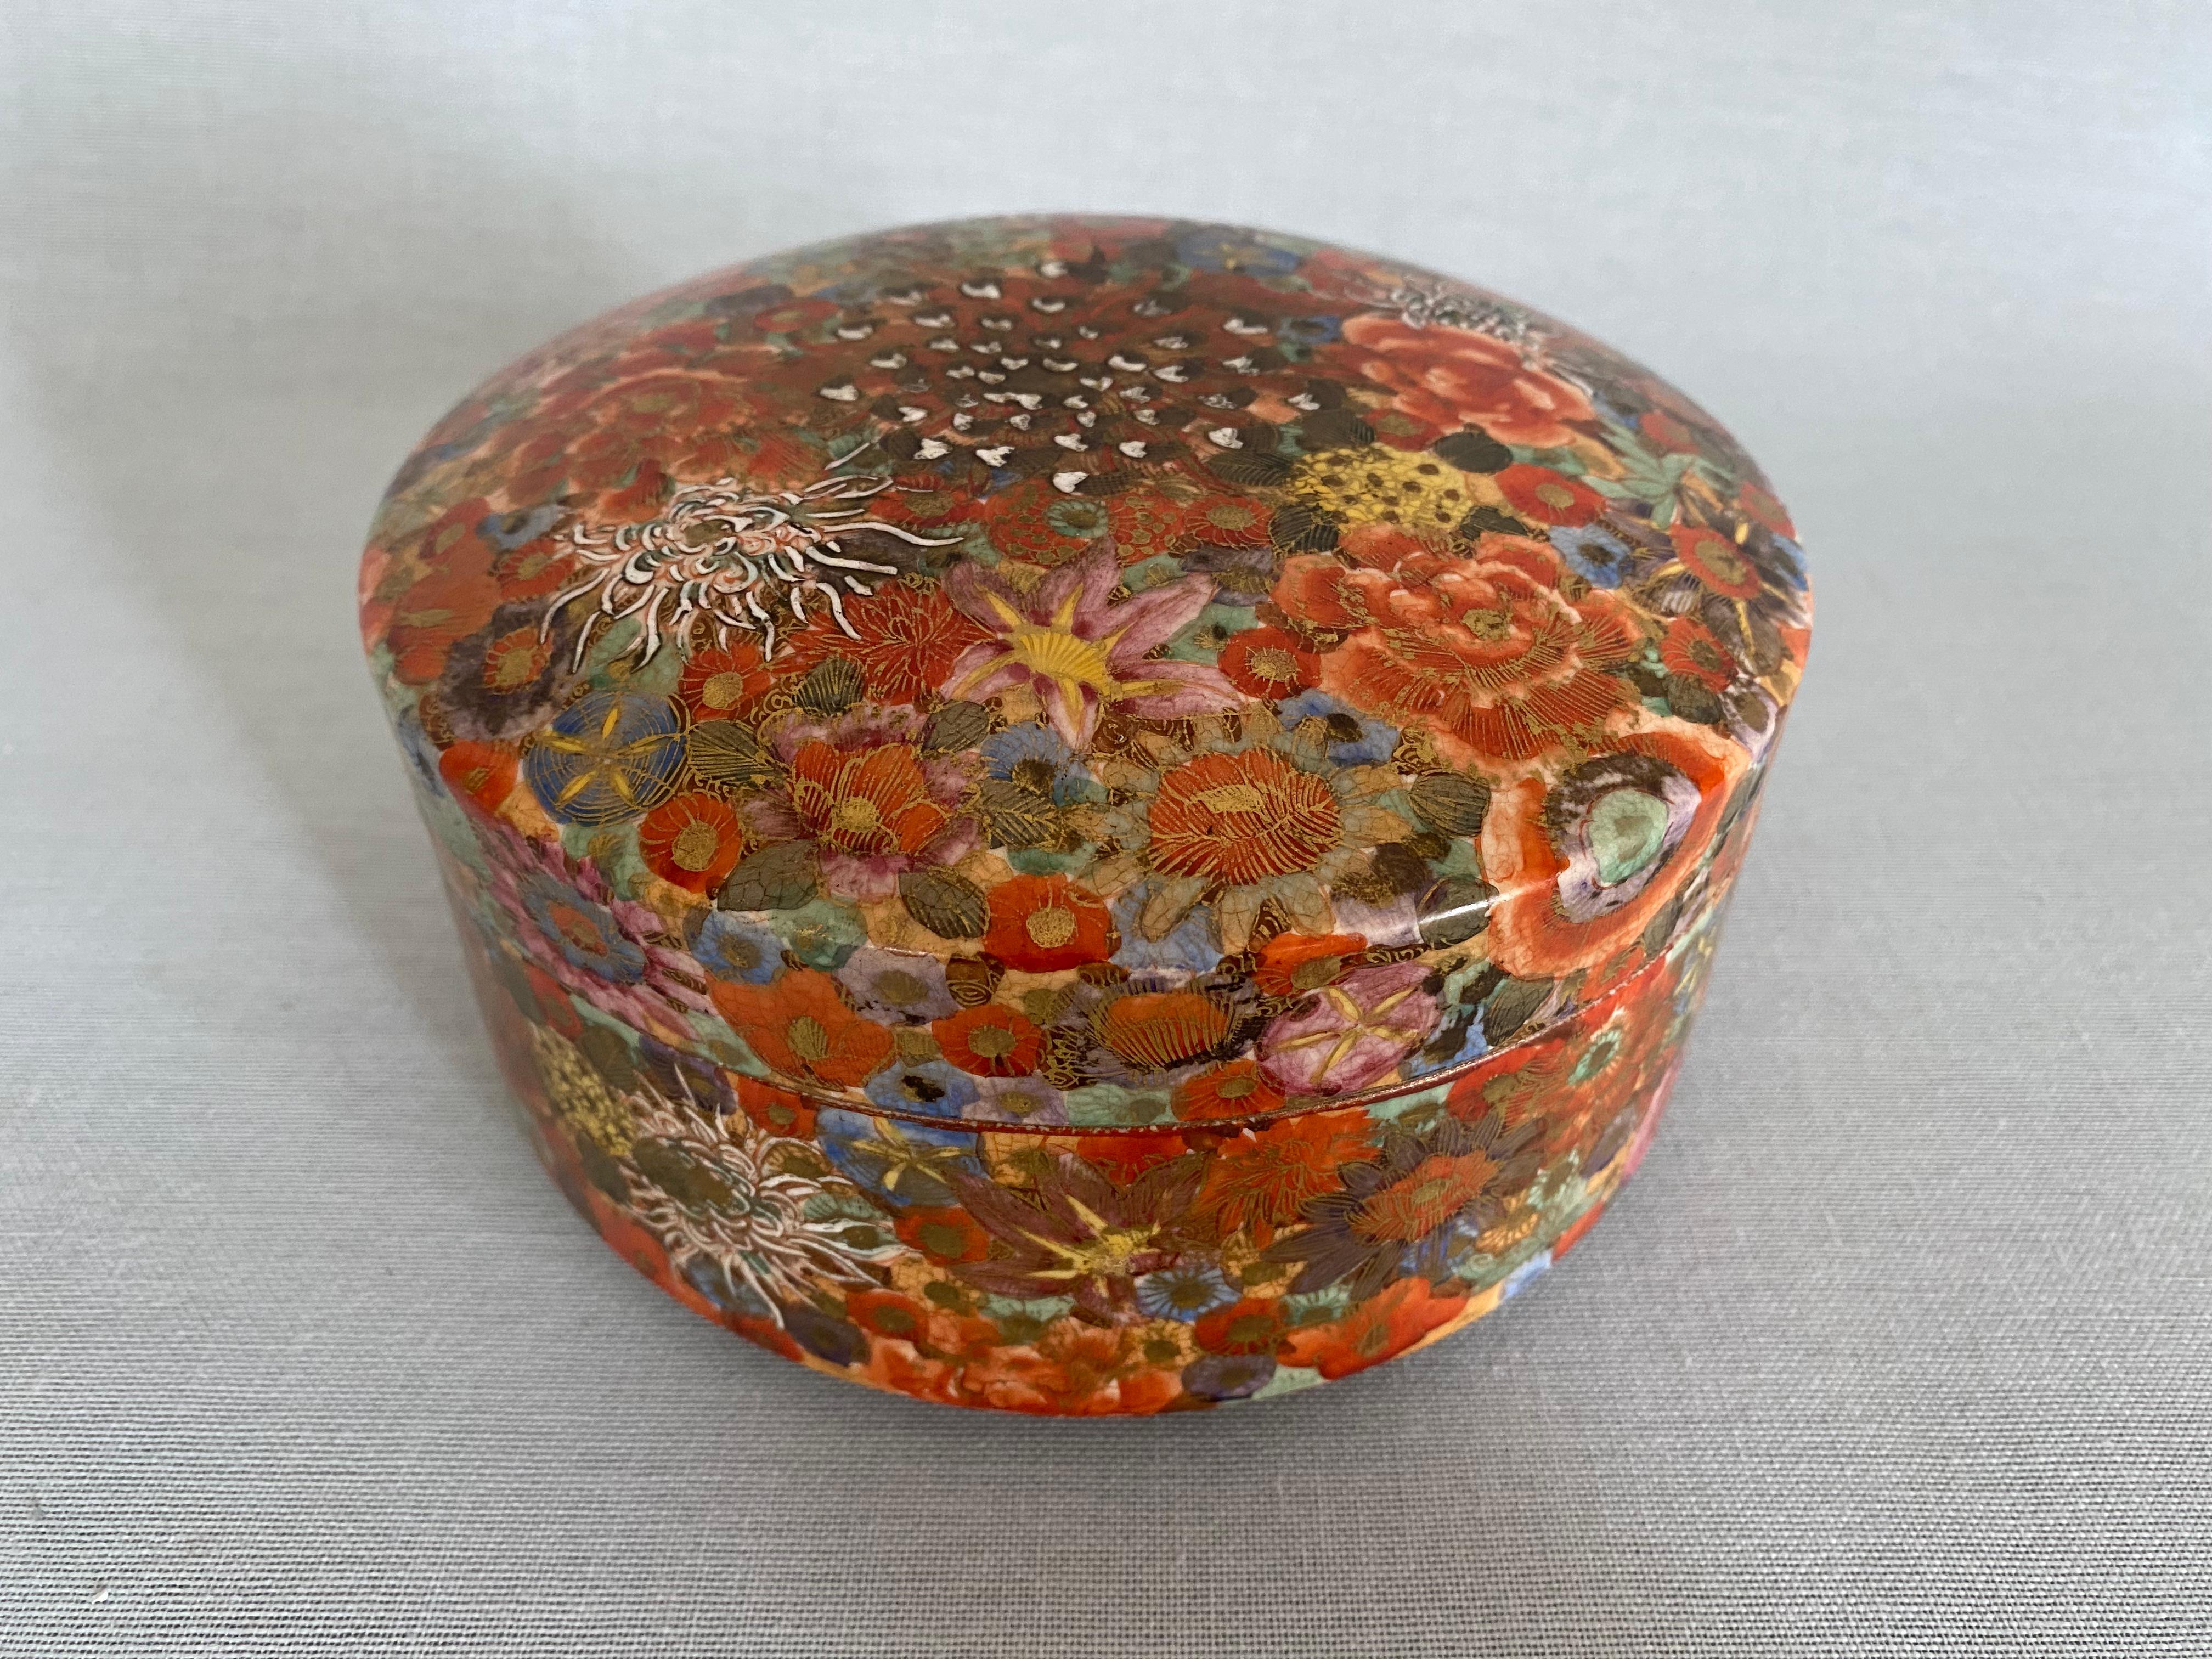 A mid 19th century Japanese Millefleur Satsuma round lid box, with Shimazu crest.
The ceramic box has a beautiful multi-colored flowers decor with rich gilt accents.
Also the interior of the box has a simple painting of flowers.
Signed to base, with